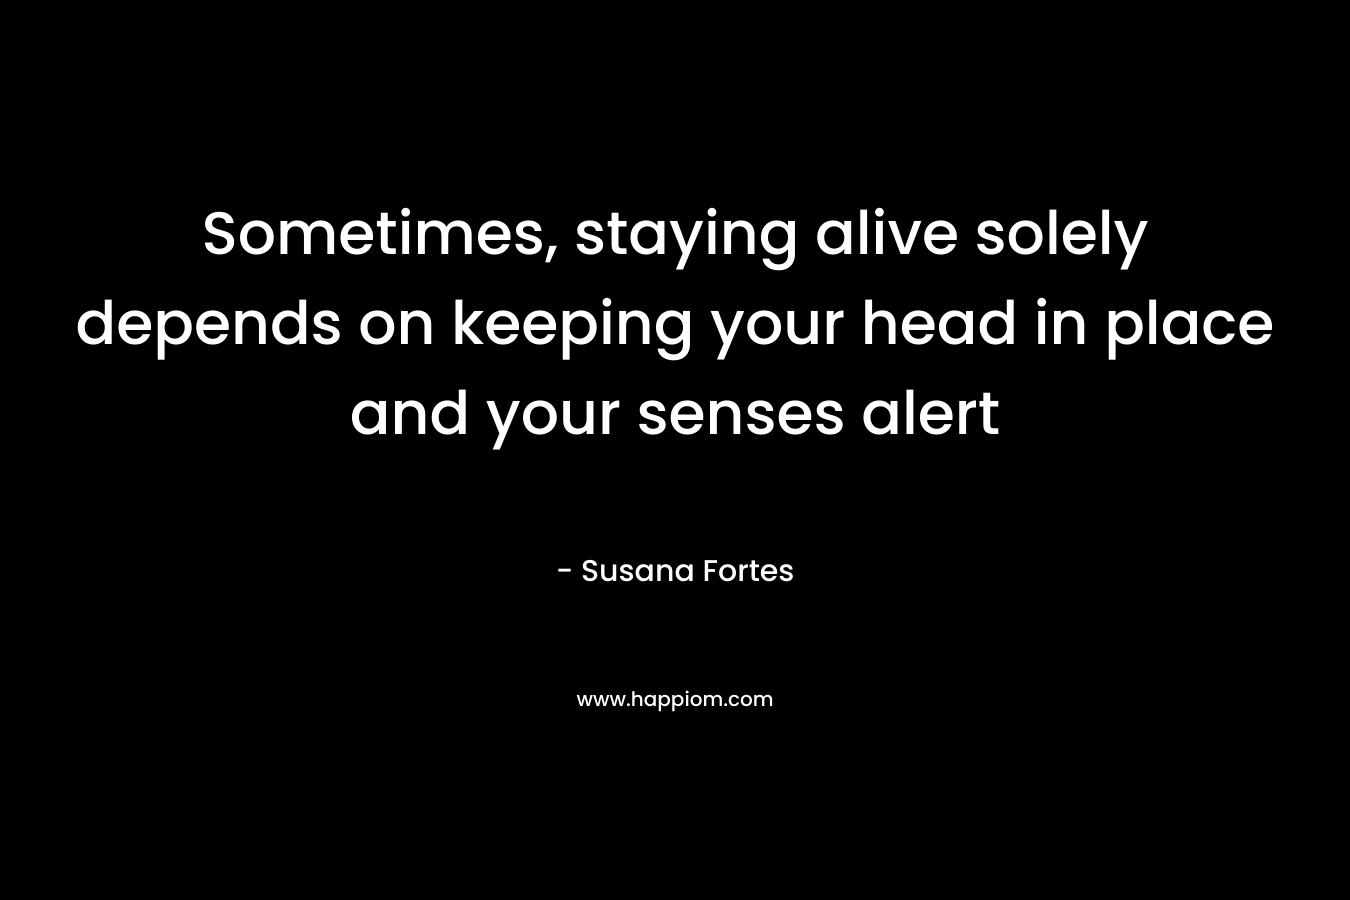 Sometimes, staying alive solely depends on keeping your head in place and your senses alert – Susana Fortes